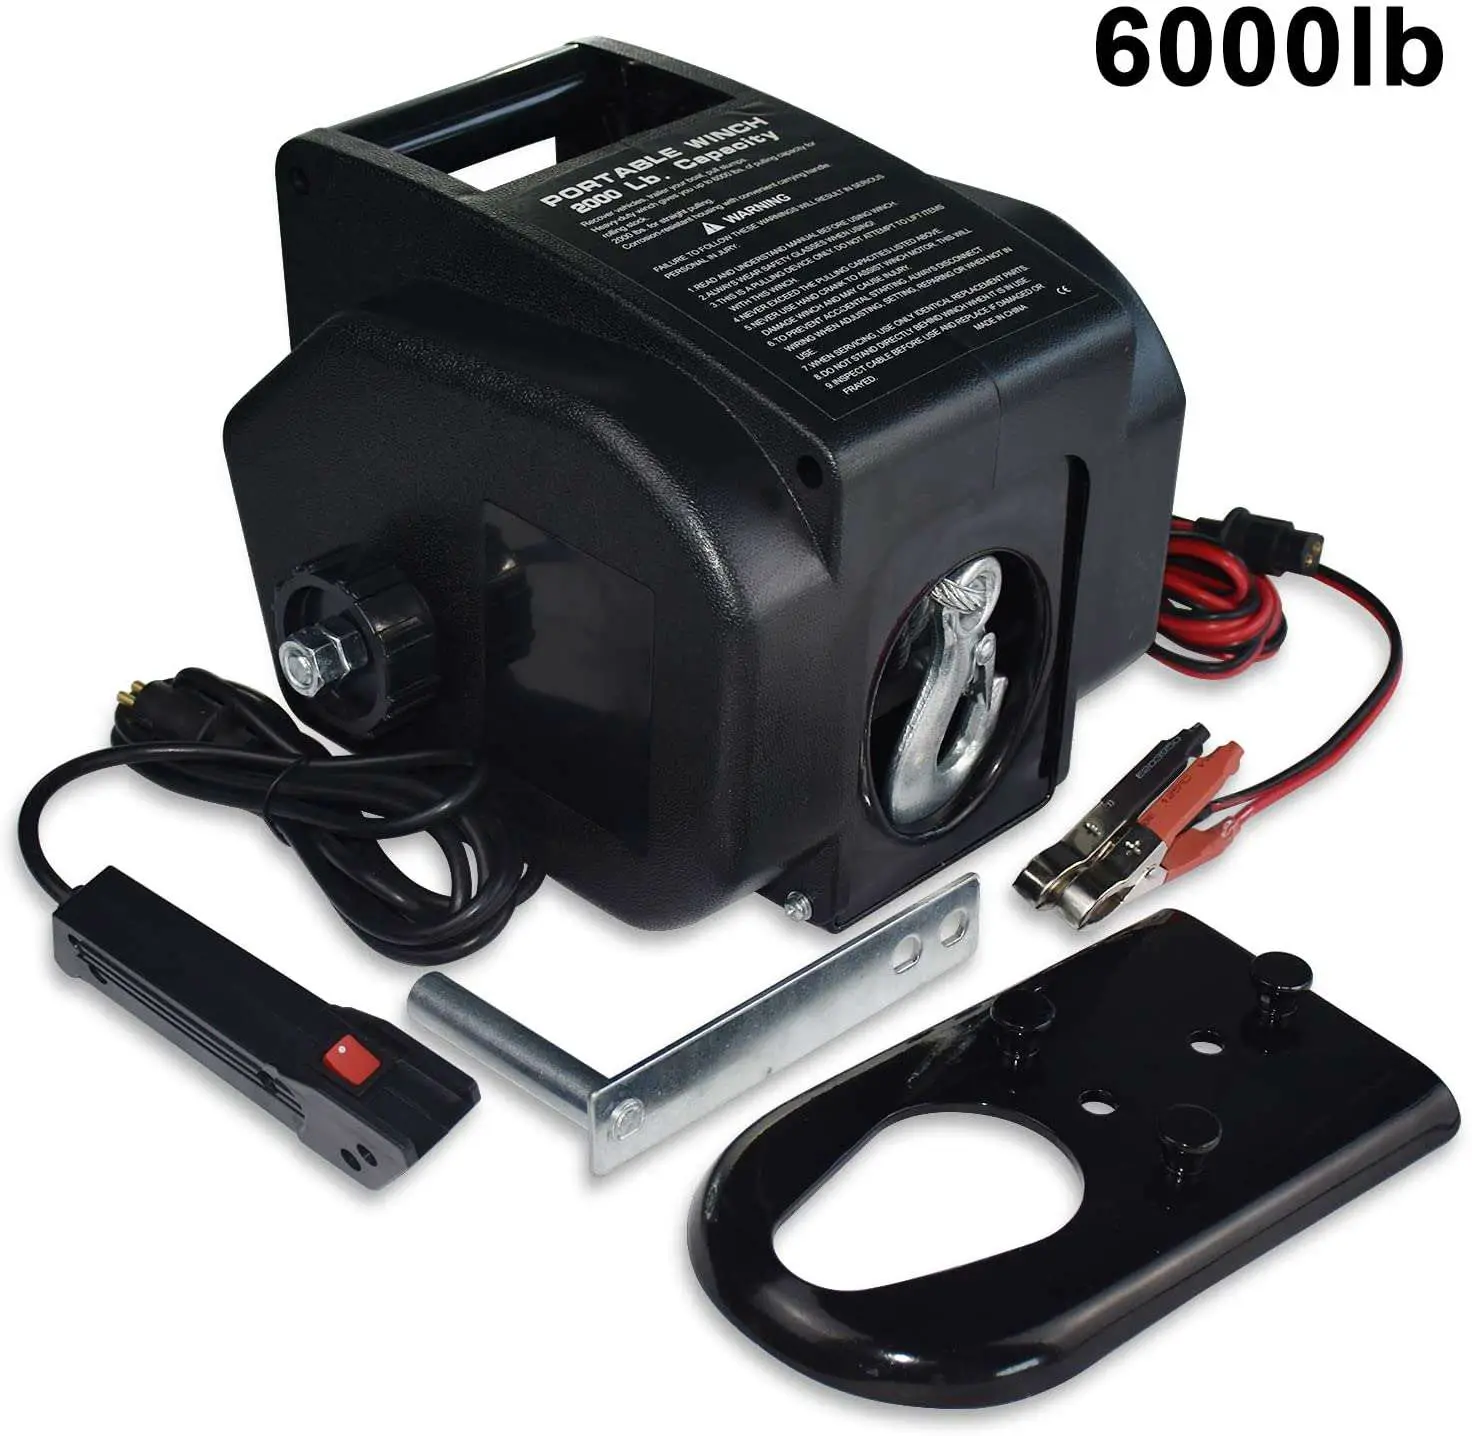 5 Best Electric Winch For Boat Trailer Reviews Of 2020